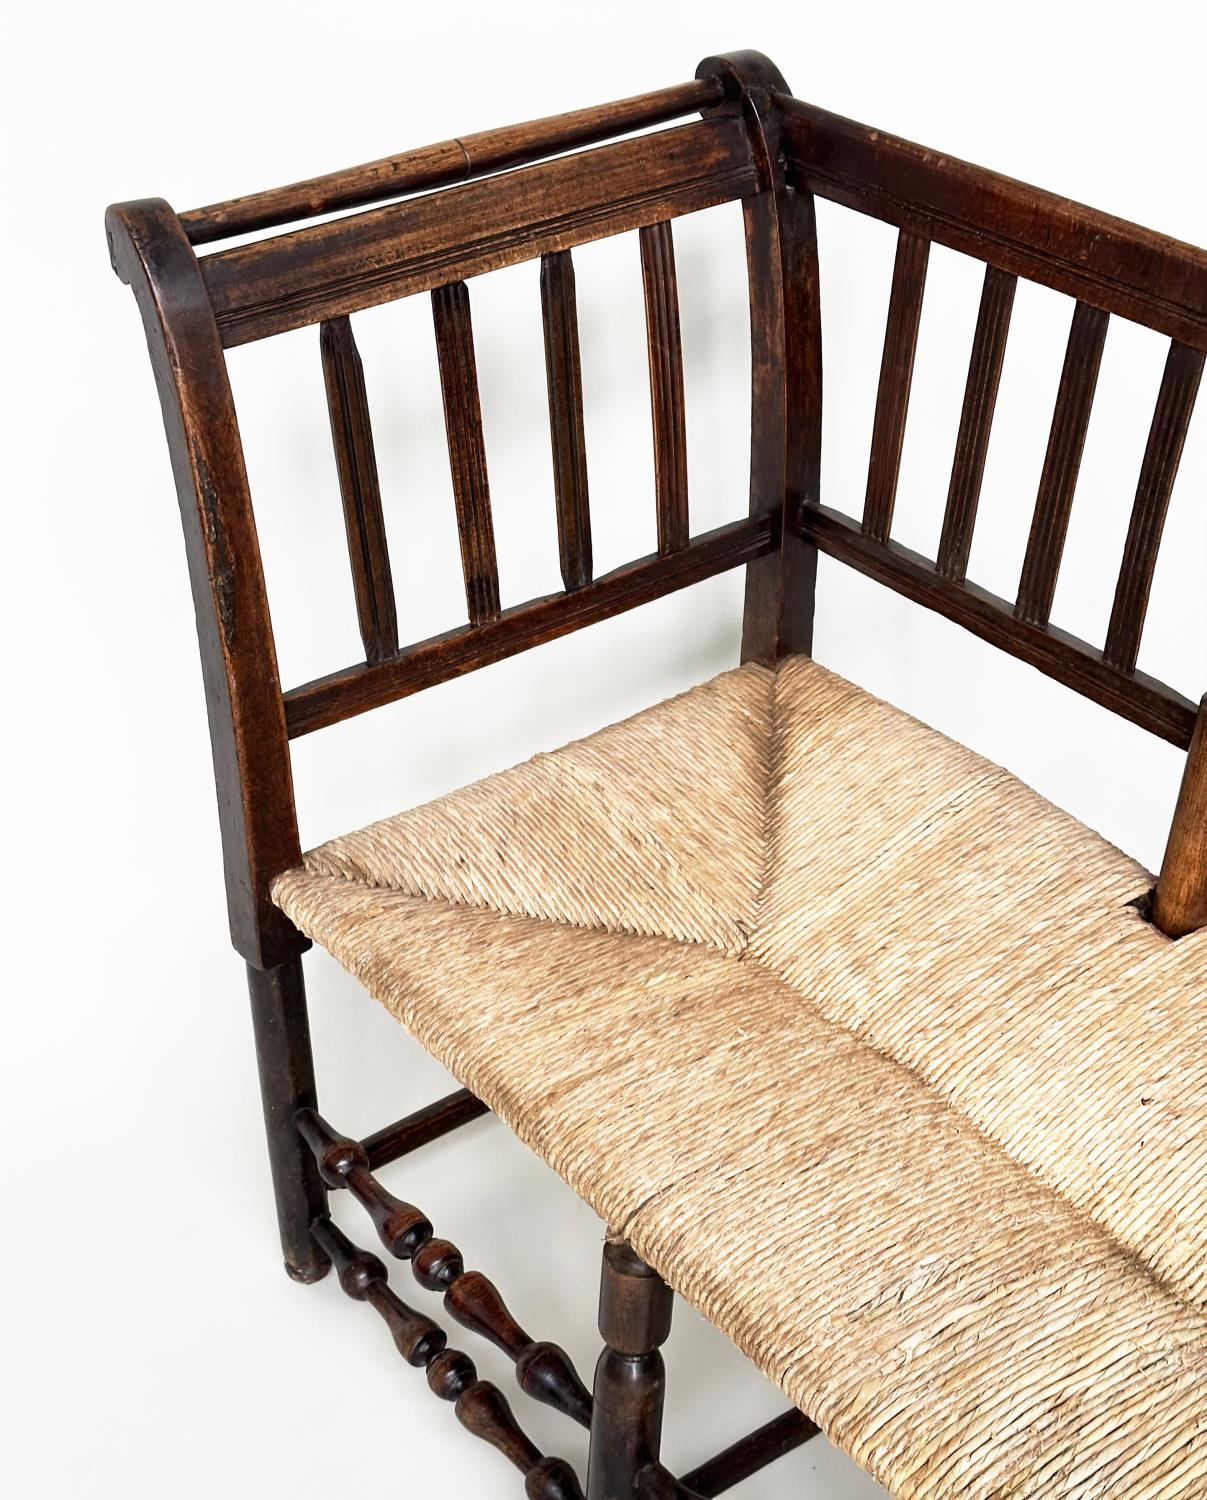 HALL BENCH, 19th century English fruitwood with slatted back, rush seat and turned stretchers, 145cm - Image 12 of 16